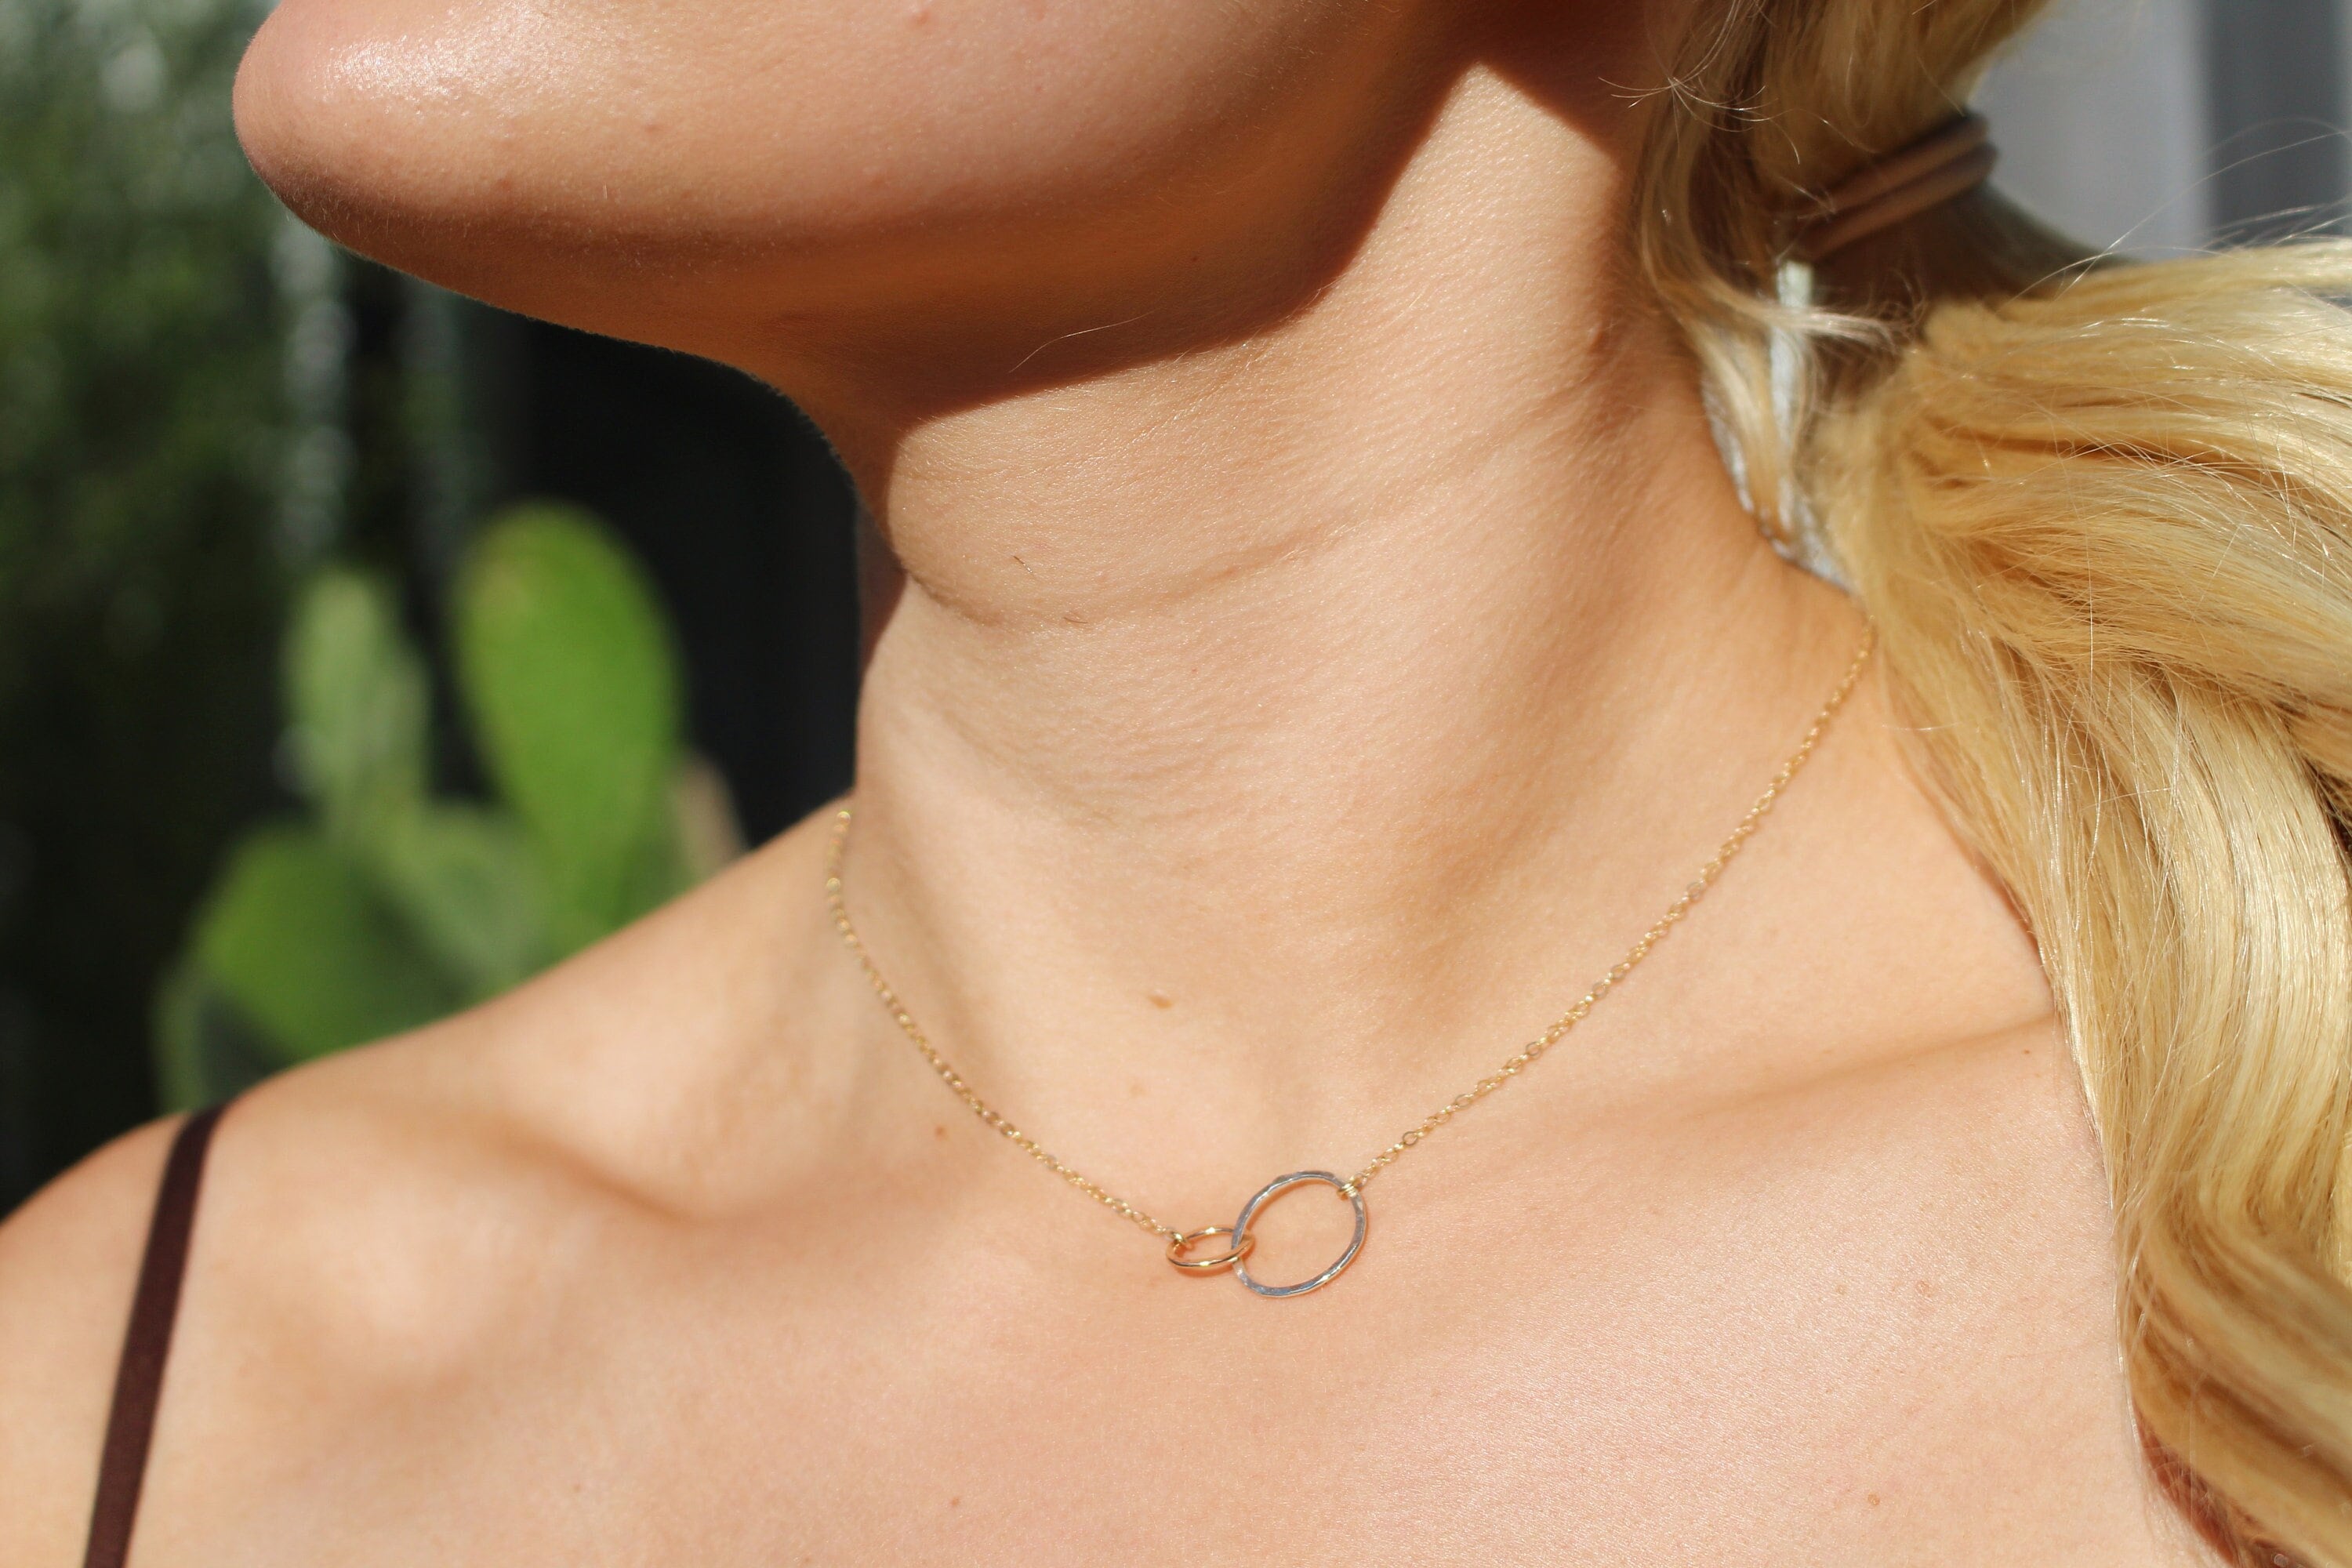 Infinity Necklace Sterling Silver, Interlocking Circle Necklace for Women  Silver, Dainty Linked Double Circle Jewelry Gift for Mom,rose Gold - Etsy